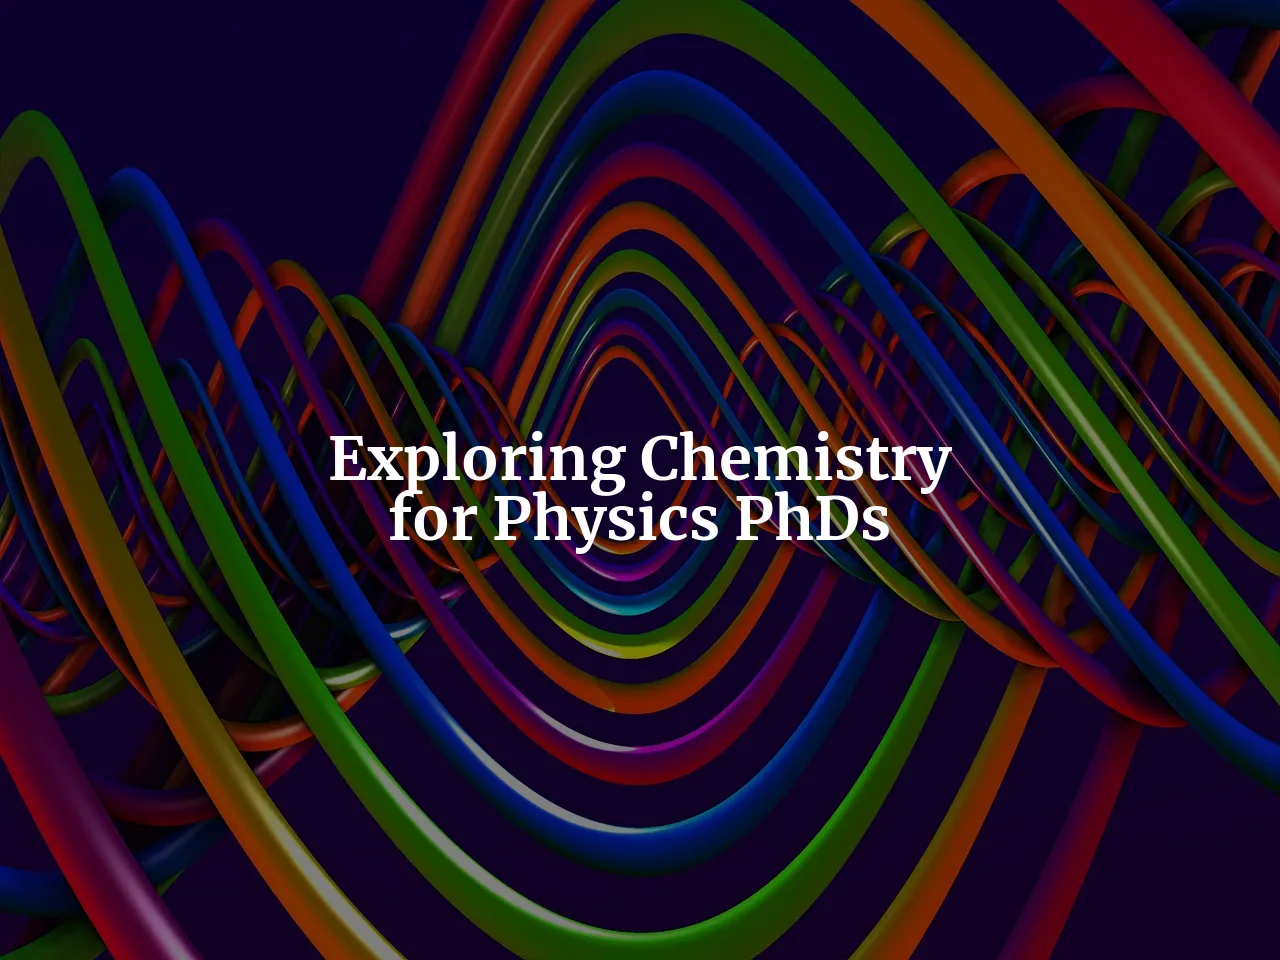 The Chemistry Connection: Exploring Interdisciplinary Research Opportunities for Physics PhD Students